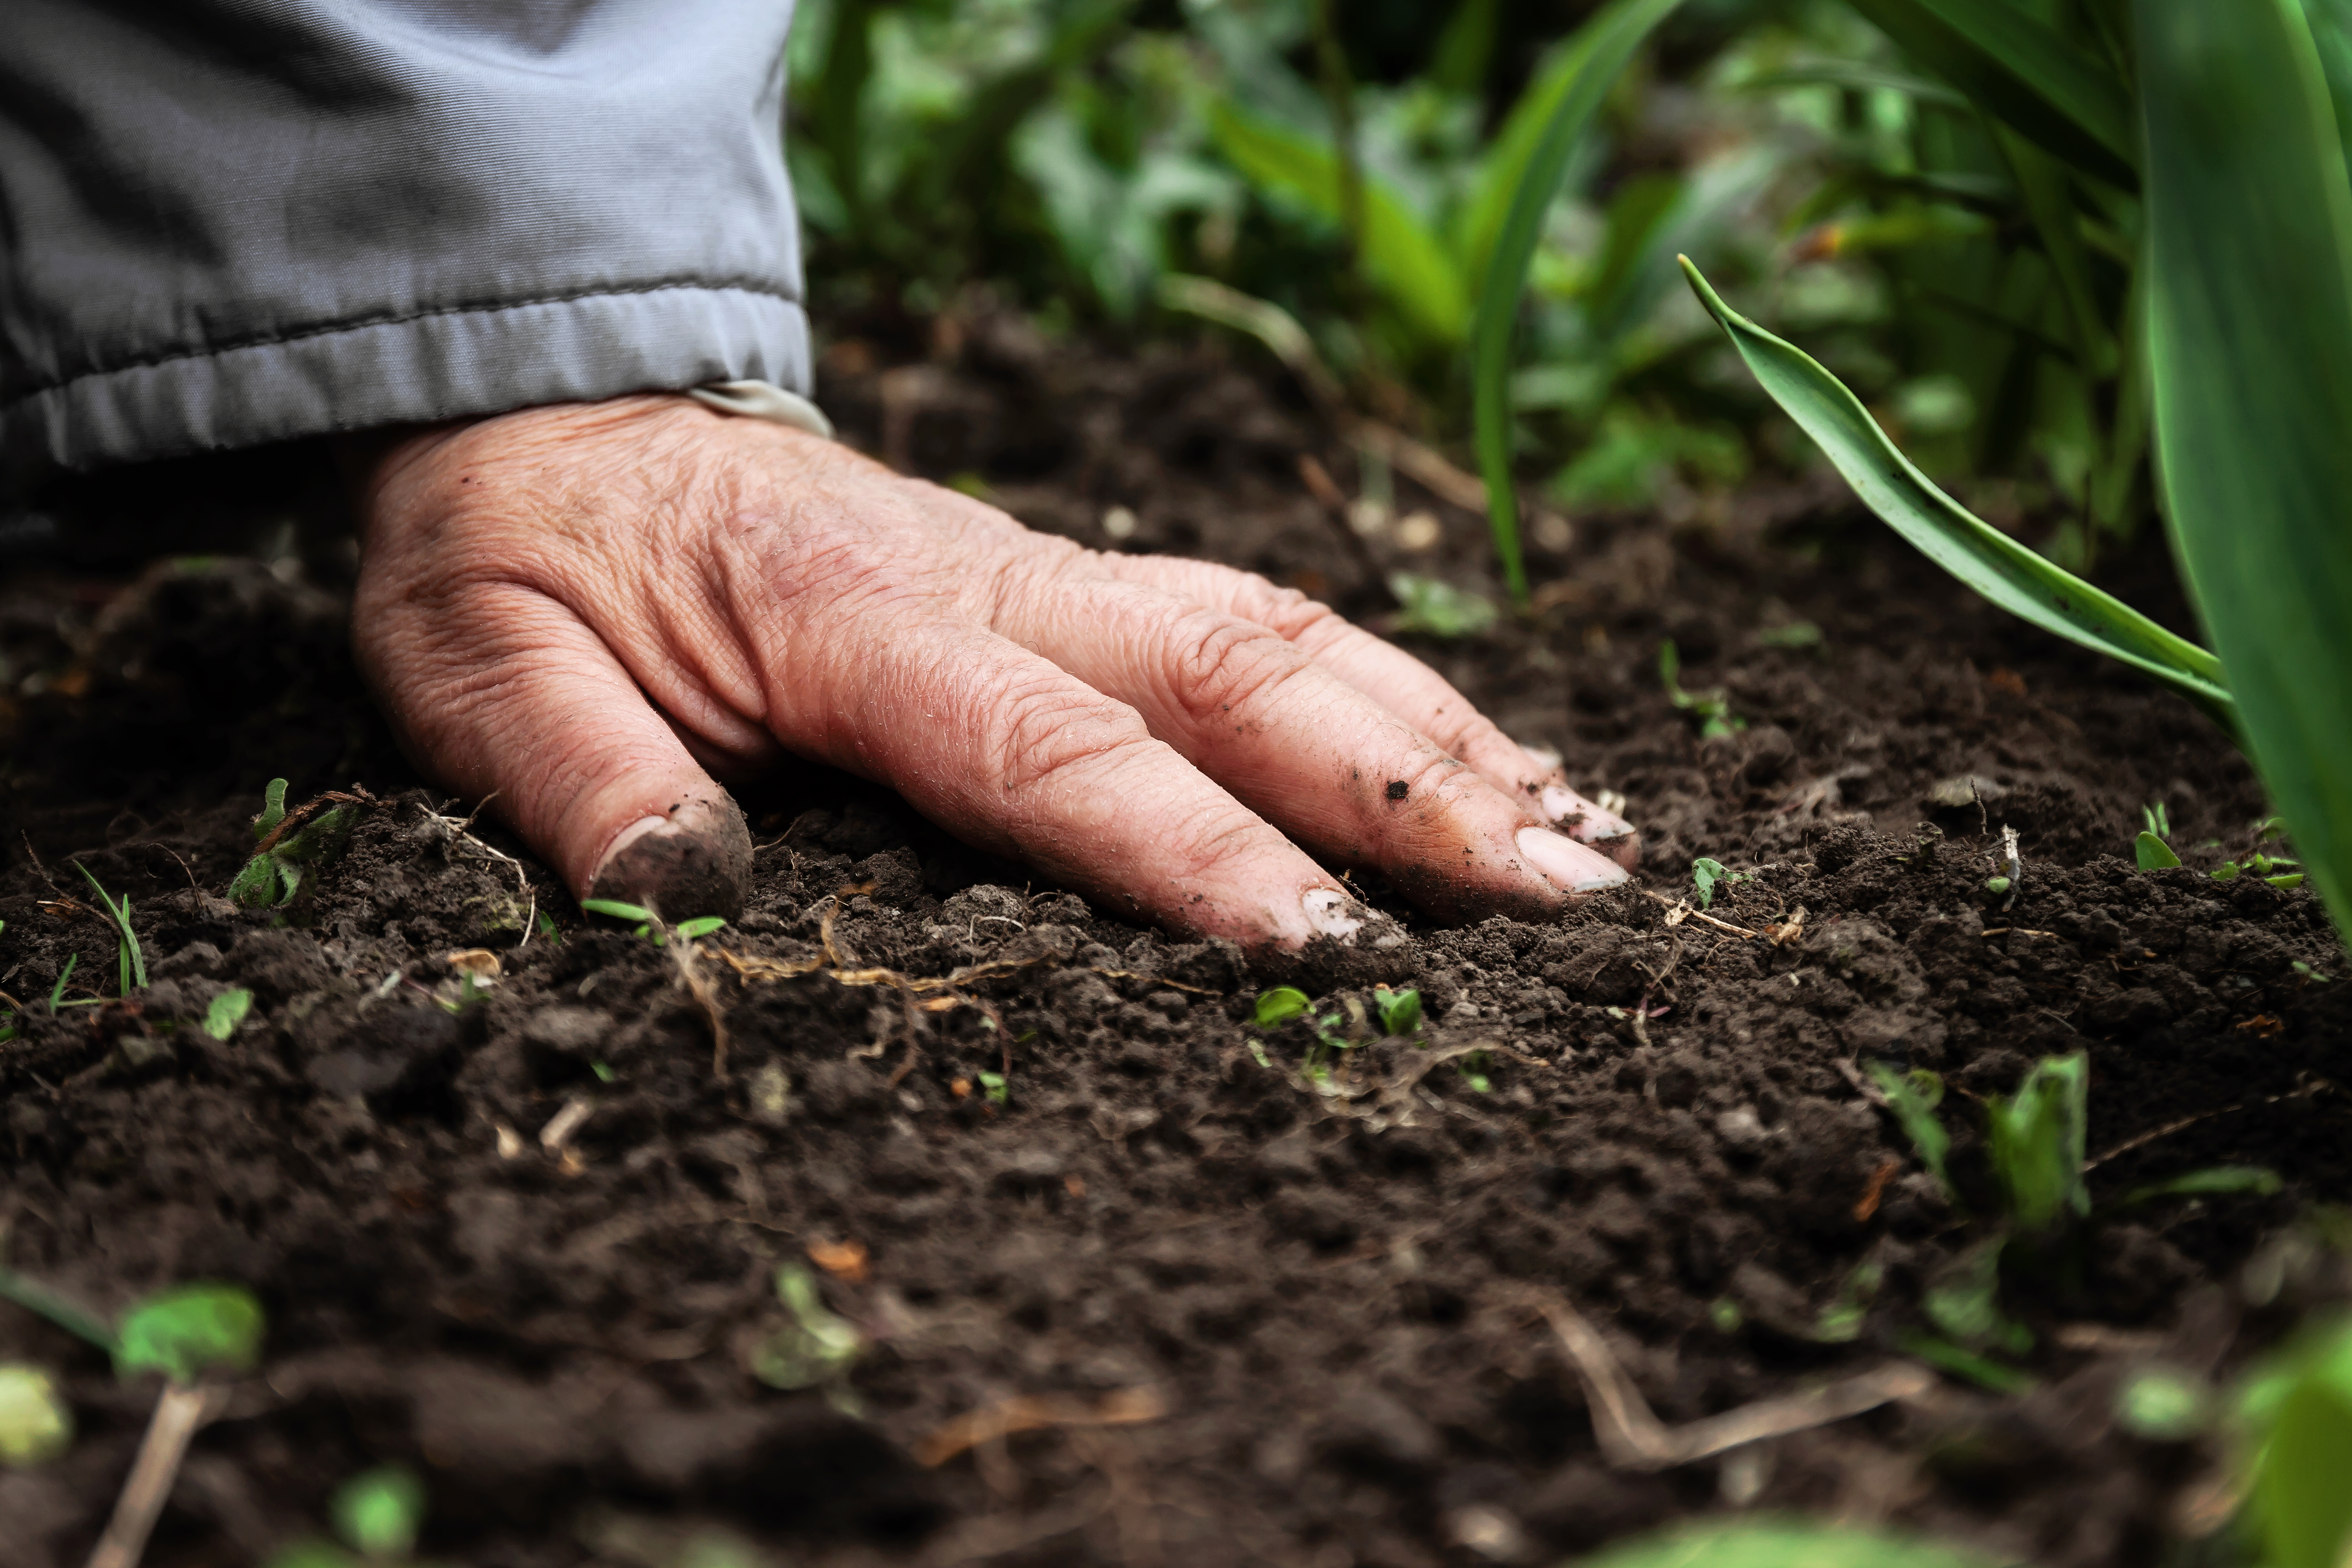 Hand resting on a soil patch surrounded by plants